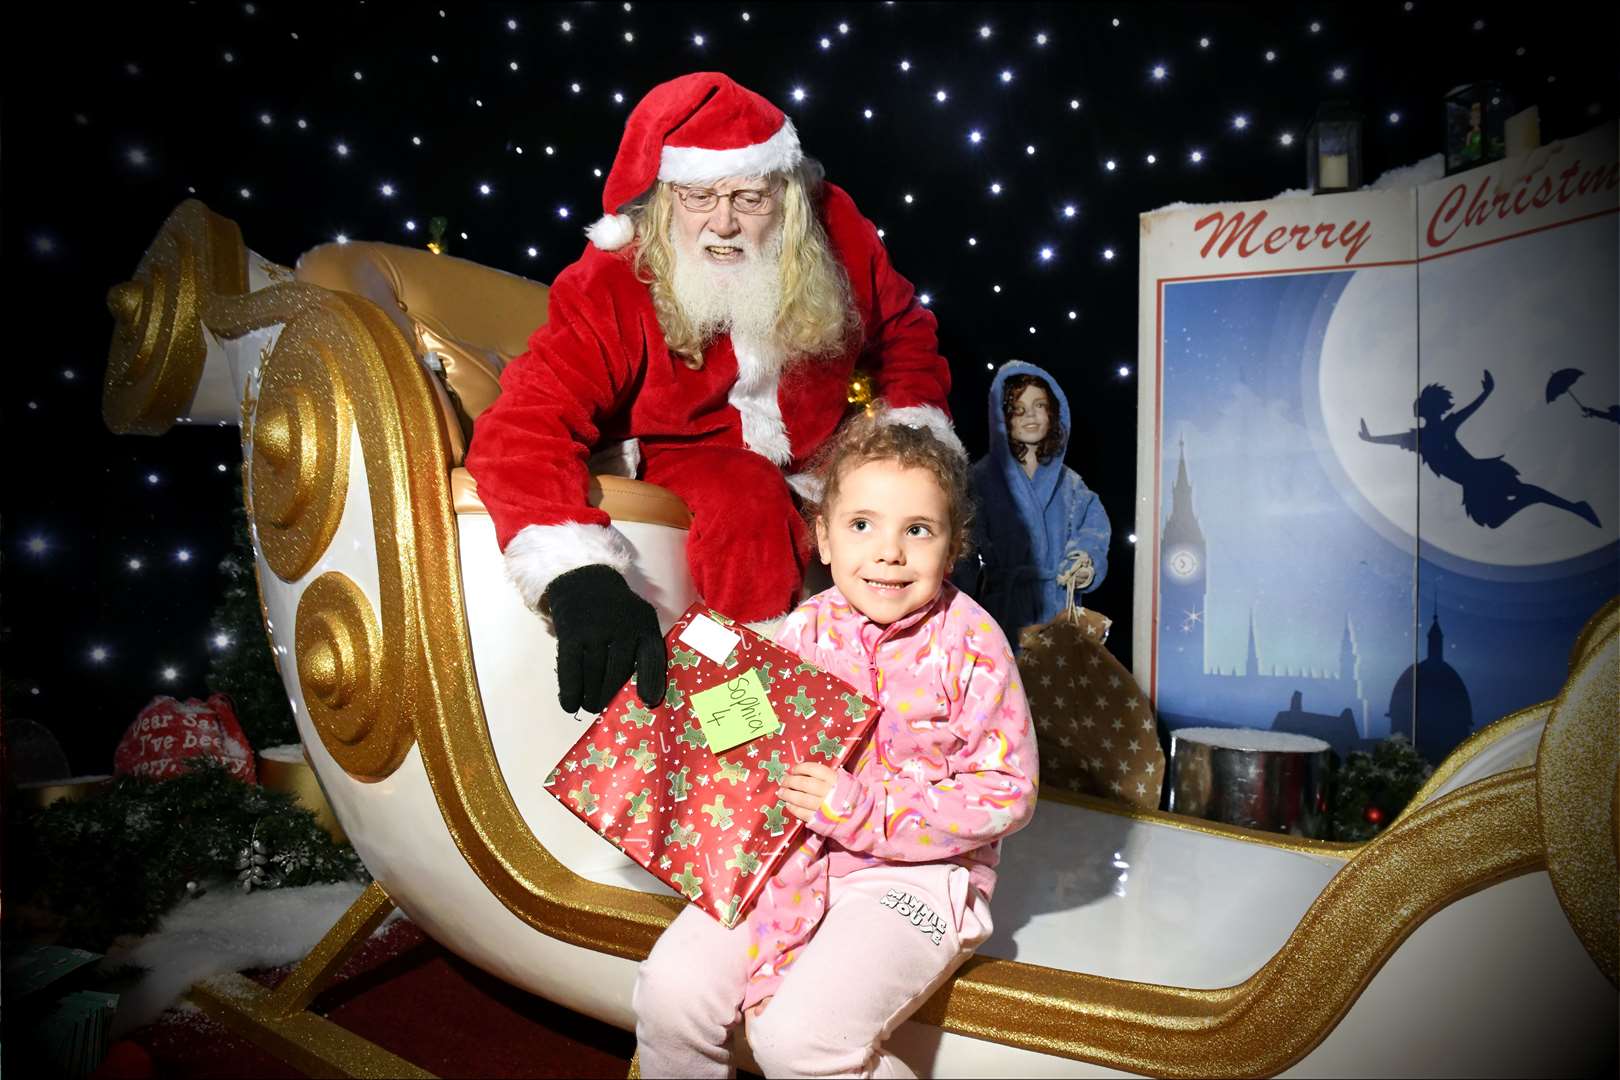 Sophia Shayar getting a gift from Santa. Picture: James Mackenzie